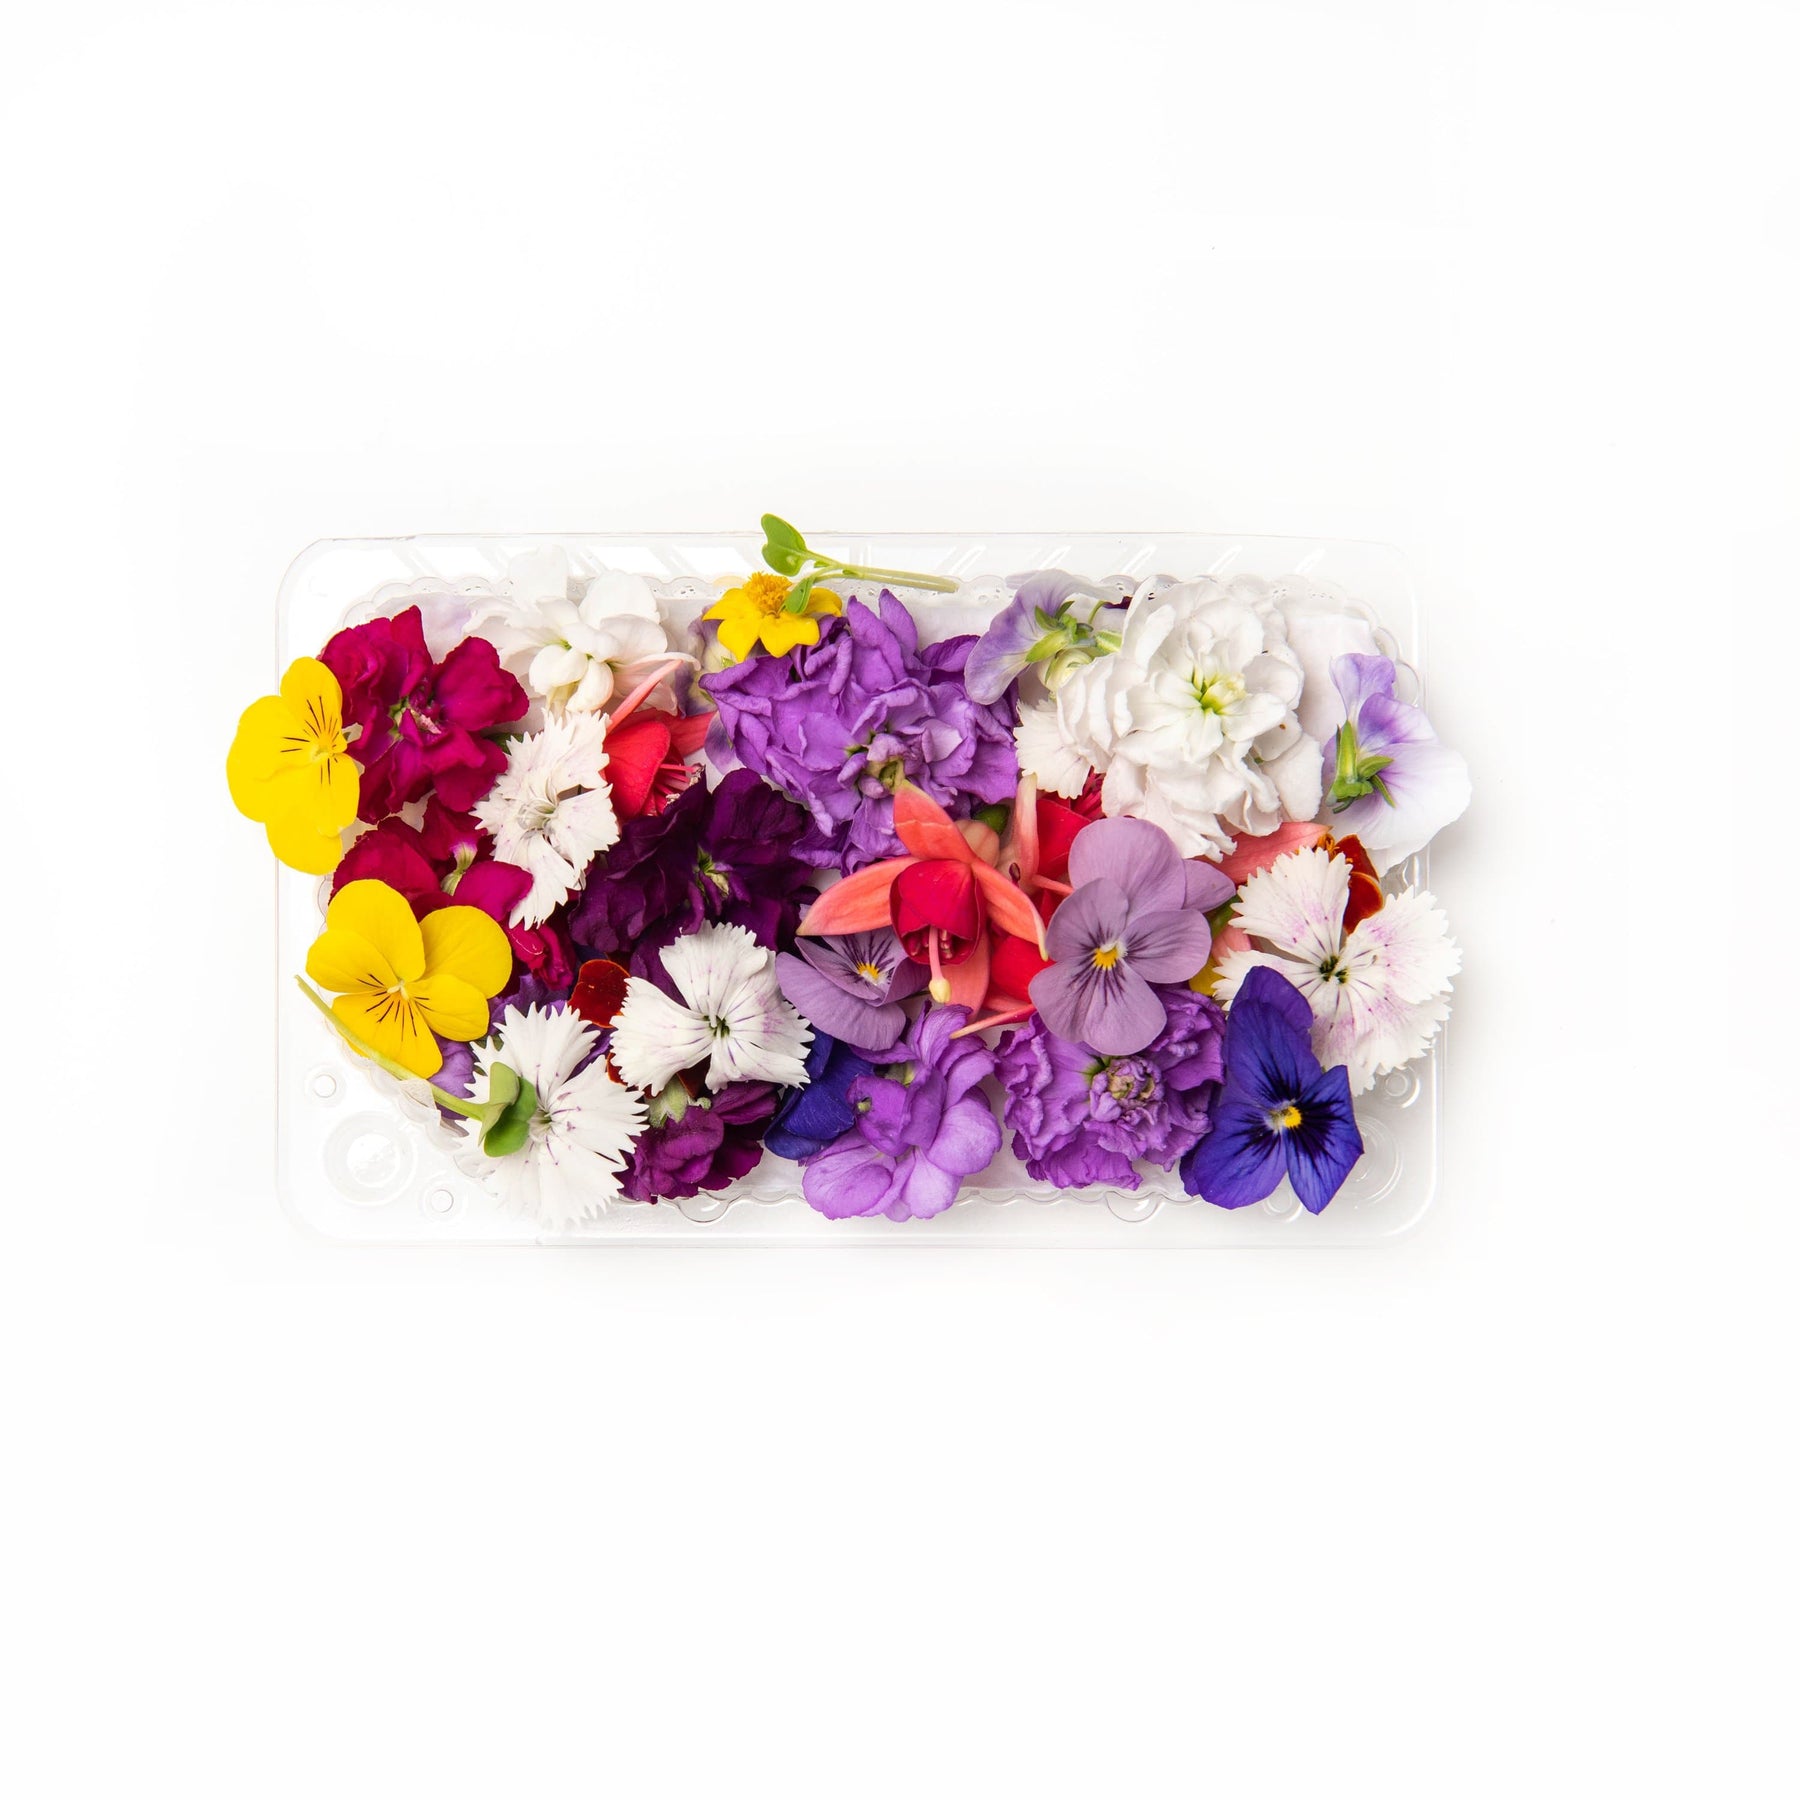 Rainbow Mix - Edible Flower Mix - The Peel Thing